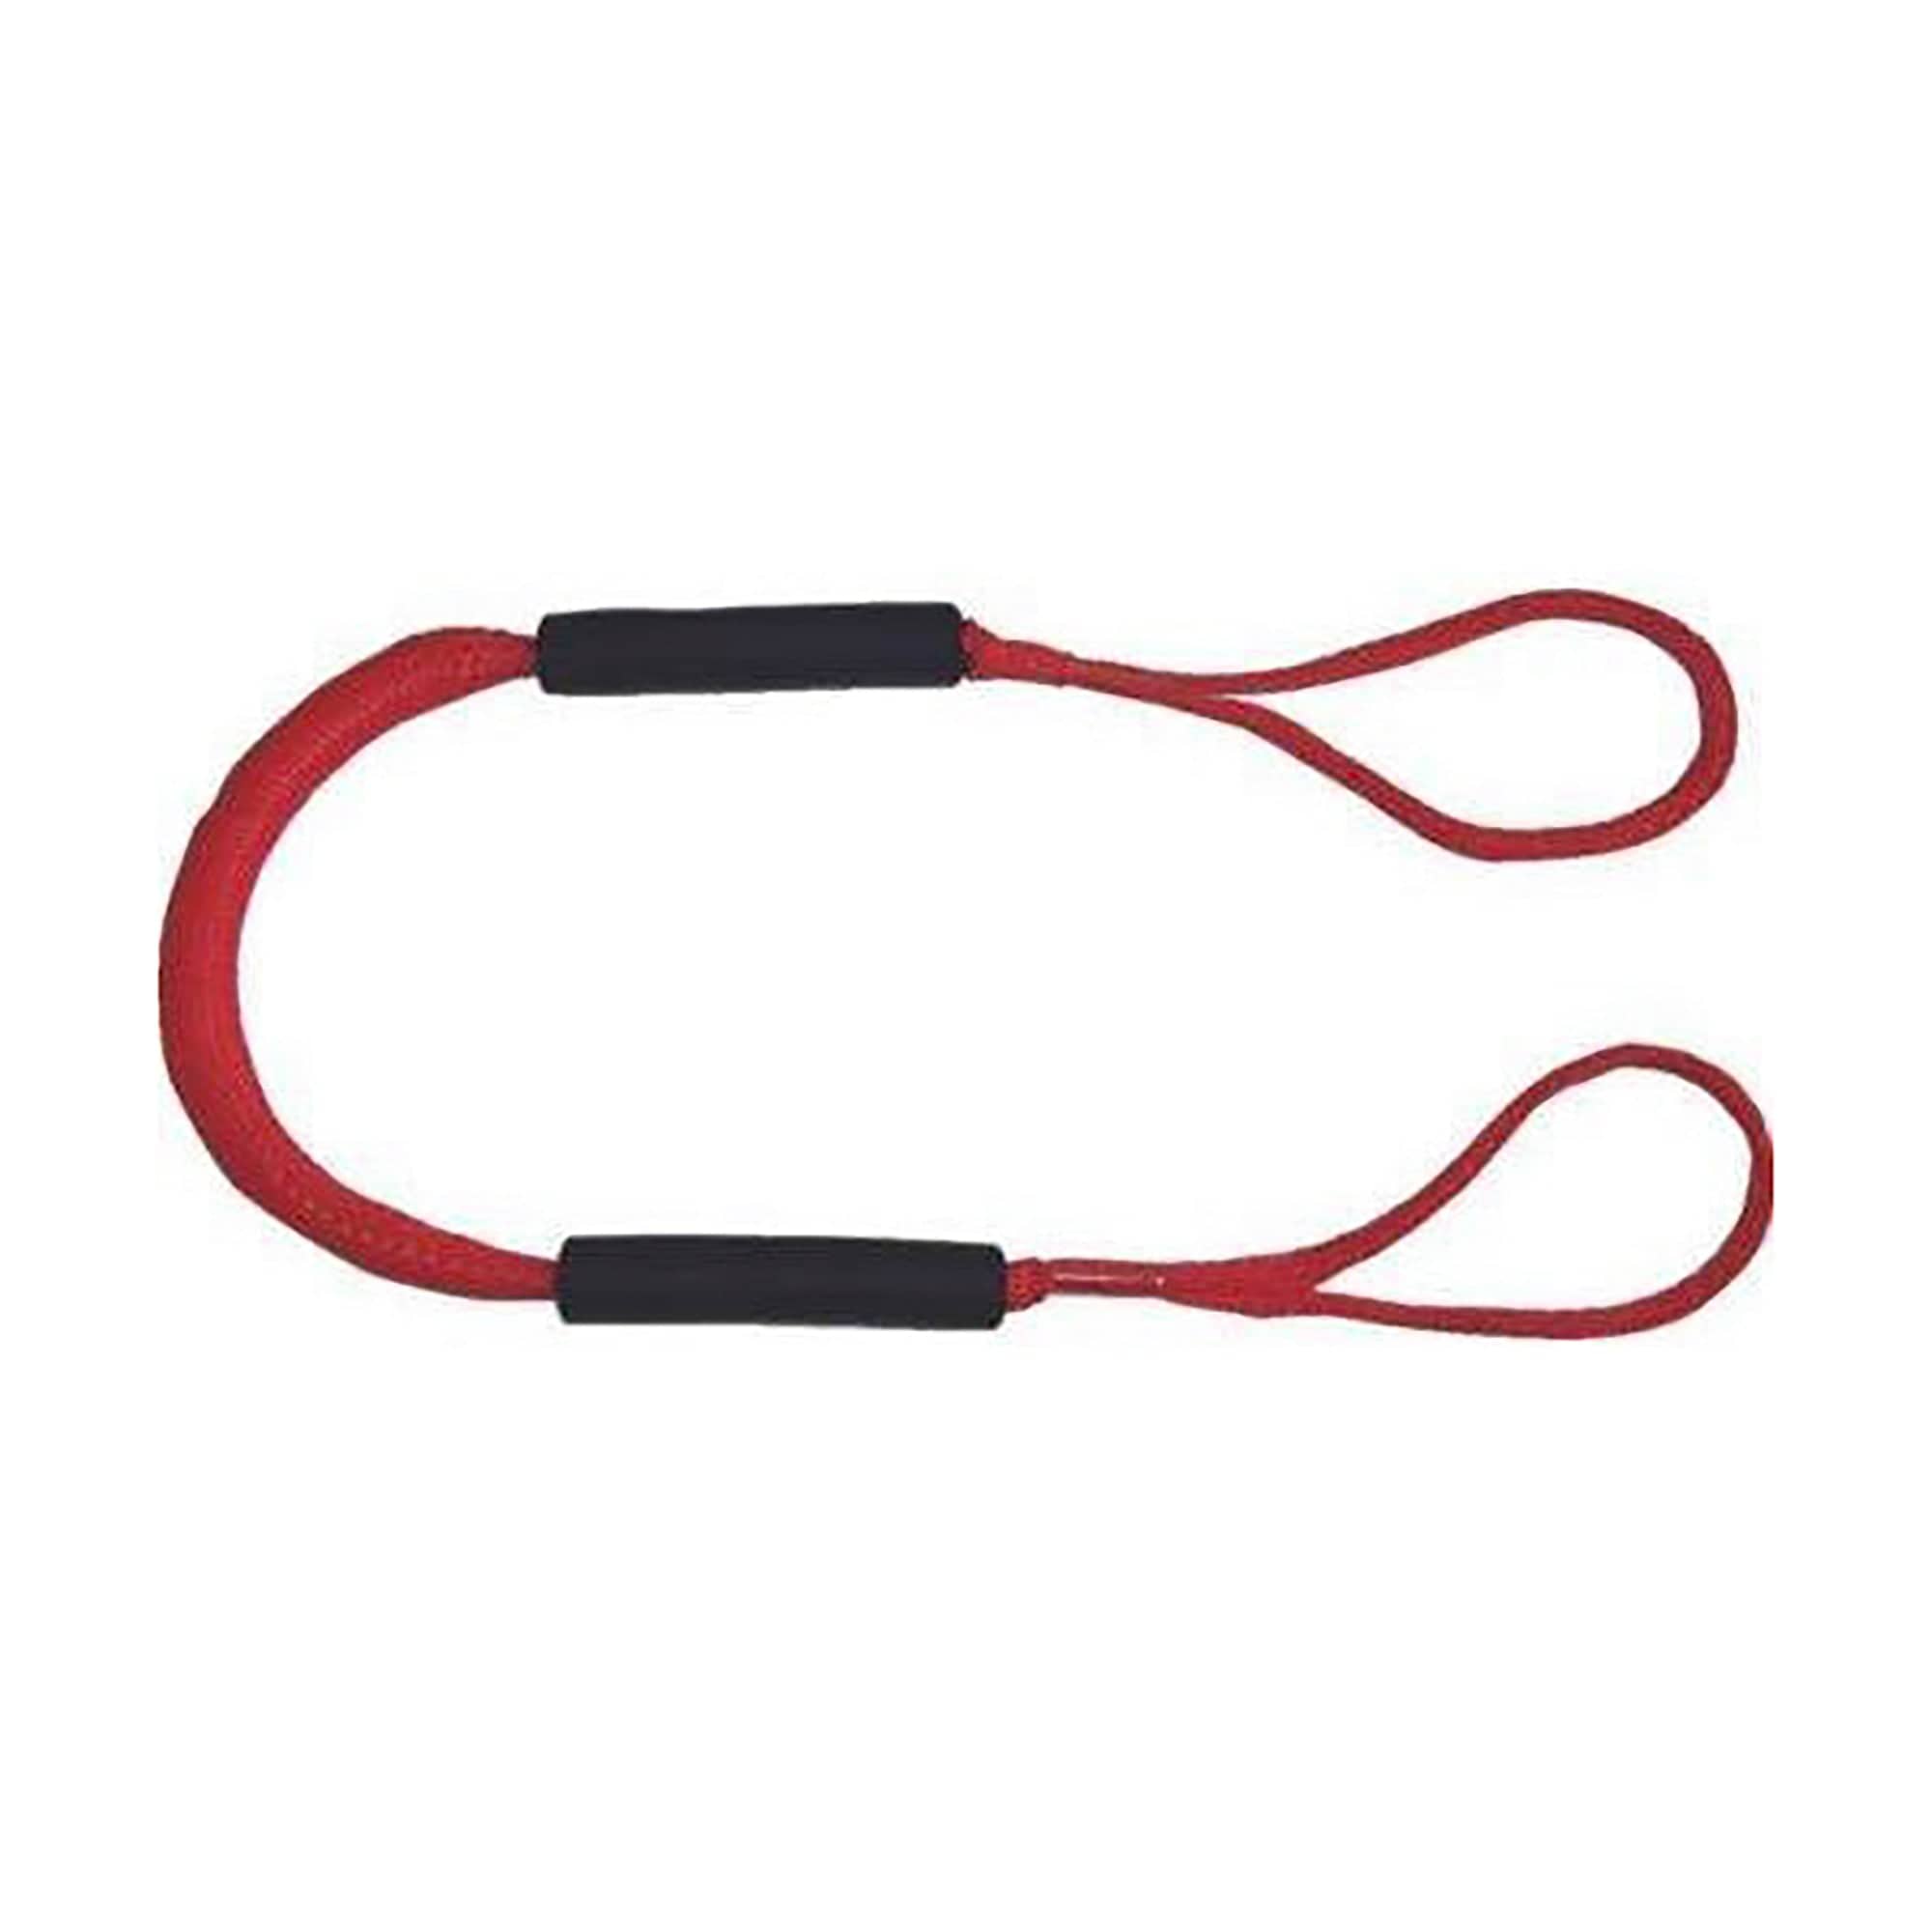 6' Dock Buddy - Red Bungie Cord Dock Line DB6-RD Greenfield Products